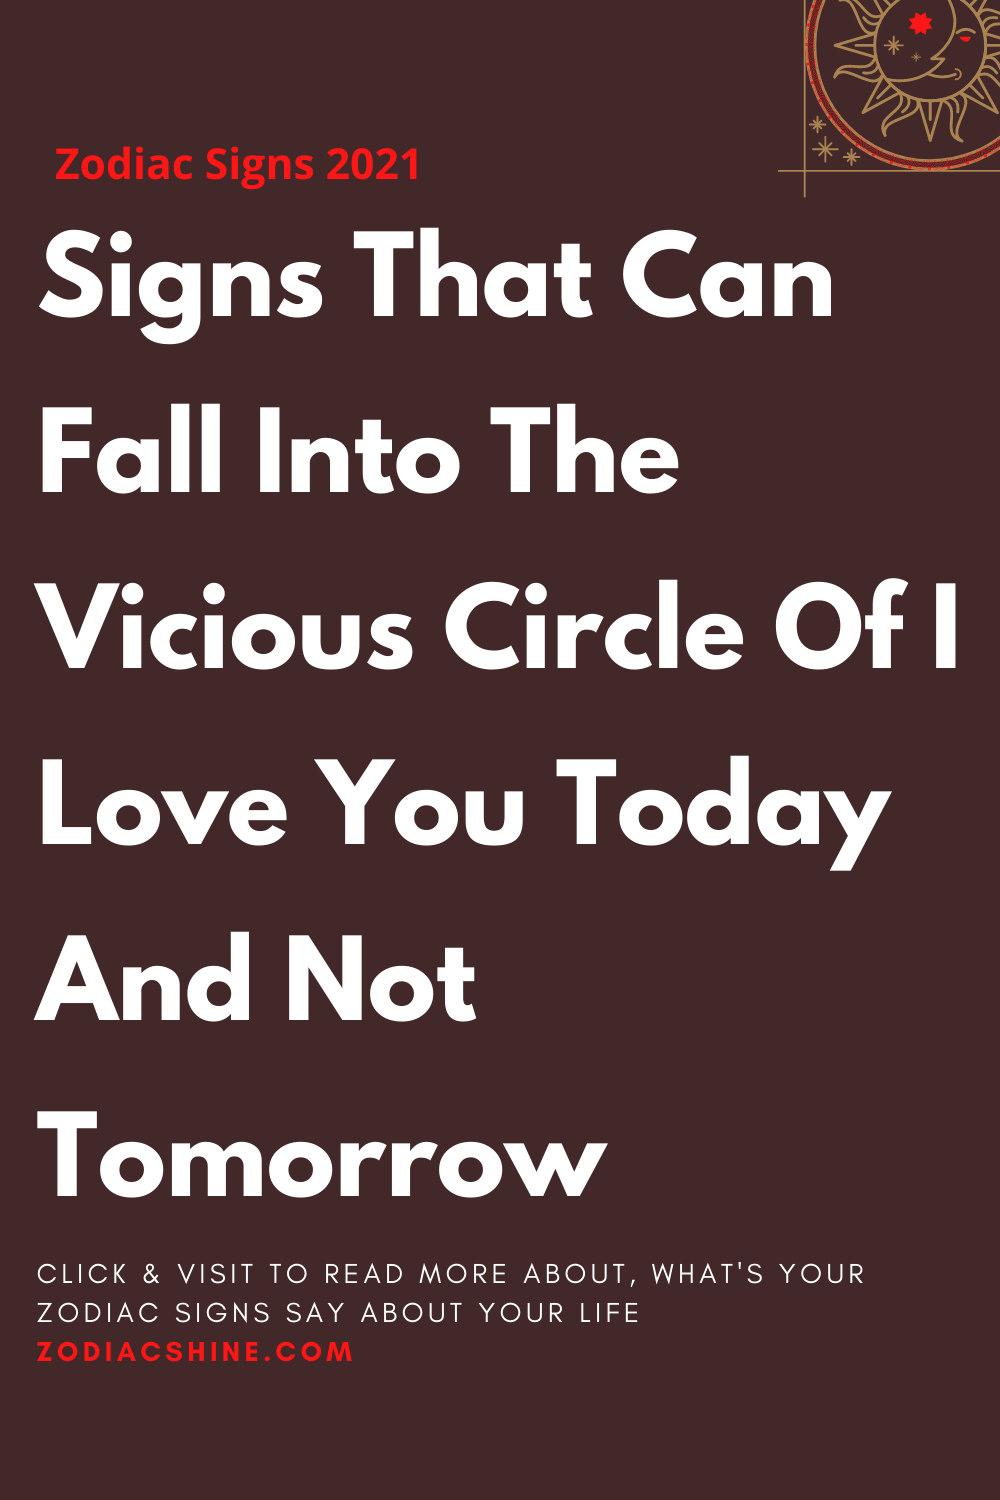 Signs That Can Fall Into The Vicious Circle Of I Love You Today And Not Tomorrow